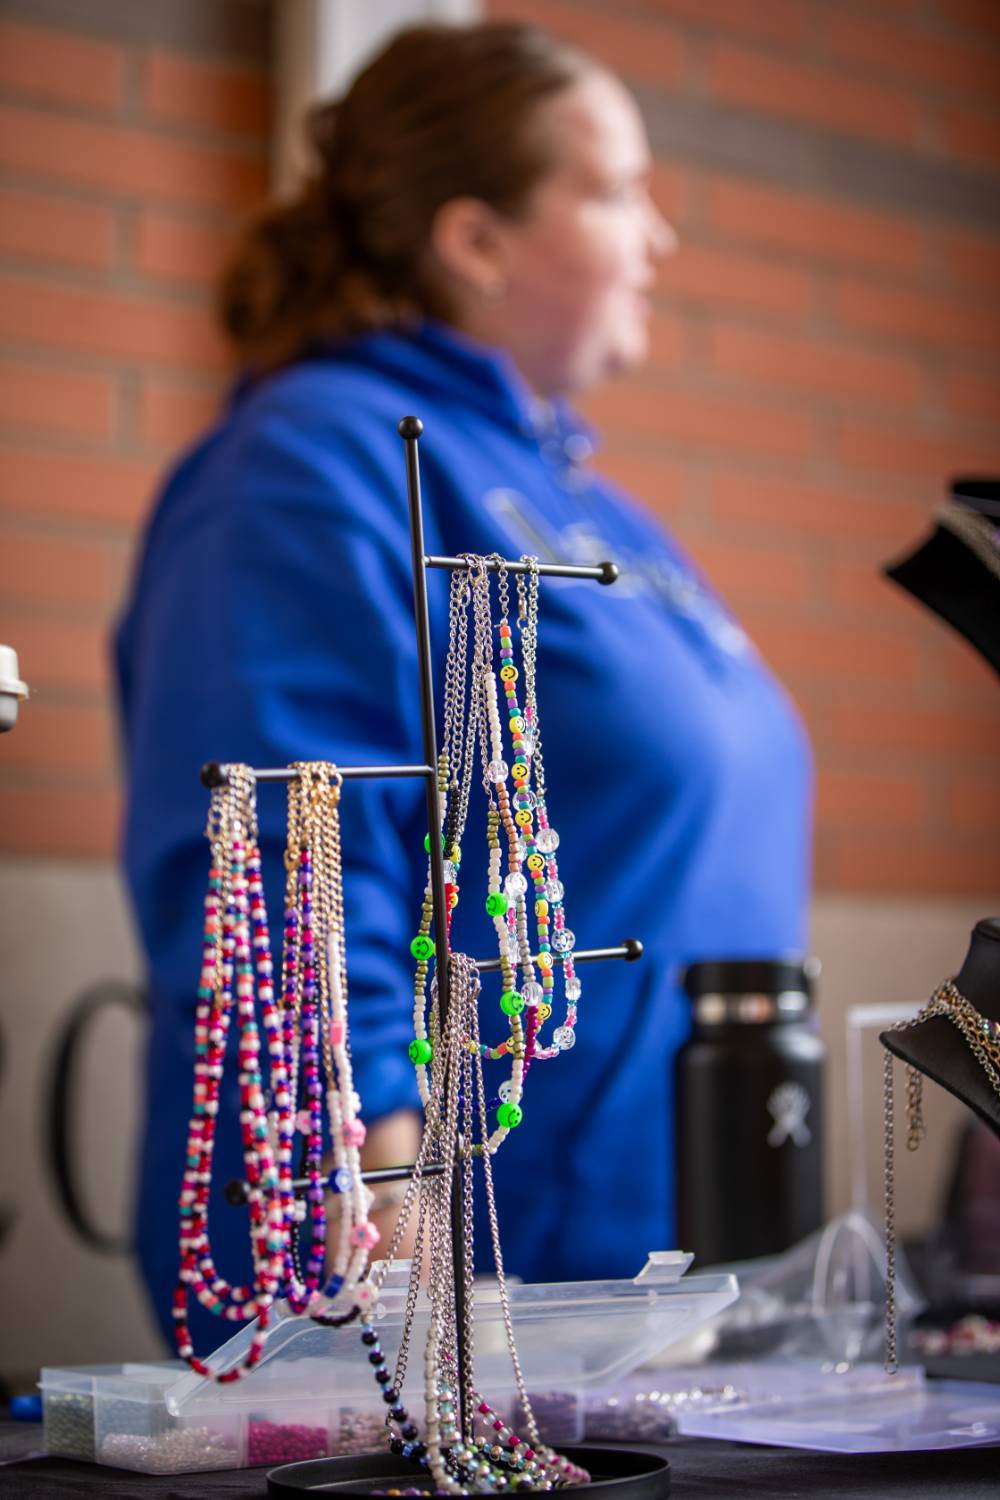 Display of jewelry during Student Small Business Market.